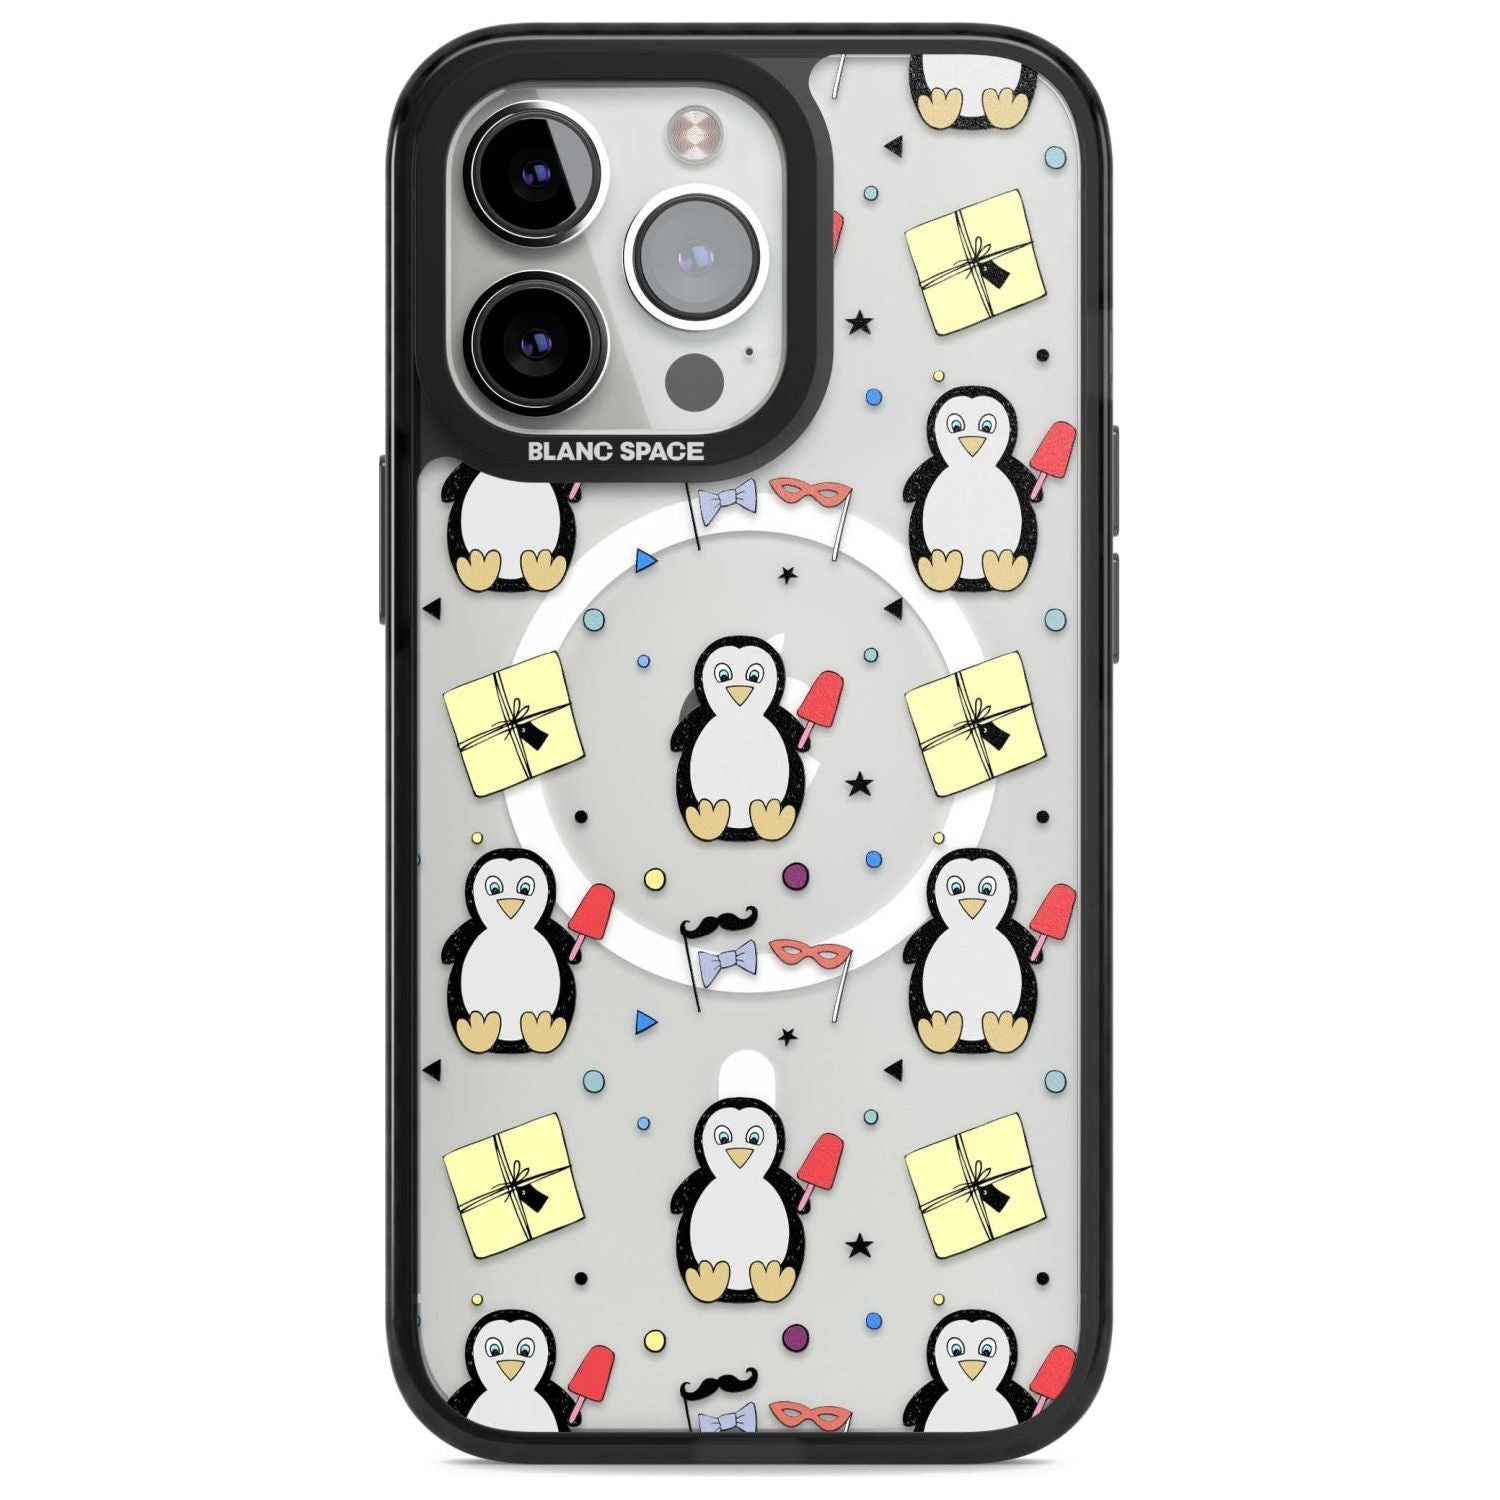 Cute Penguin Pattern Clear Phone Case iPhone 15 Pro / Magsafe Black Impact Case,iPhone 15 Pro Max / Magsafe Black Impact Case,iPhone 14 Pro Max / Magsafe Black Impact Case,iPhone 13 Pro / Magsafe Black Impact Case,iPhone 14 Pro / Magsafe Black Impact Case Blanc Space